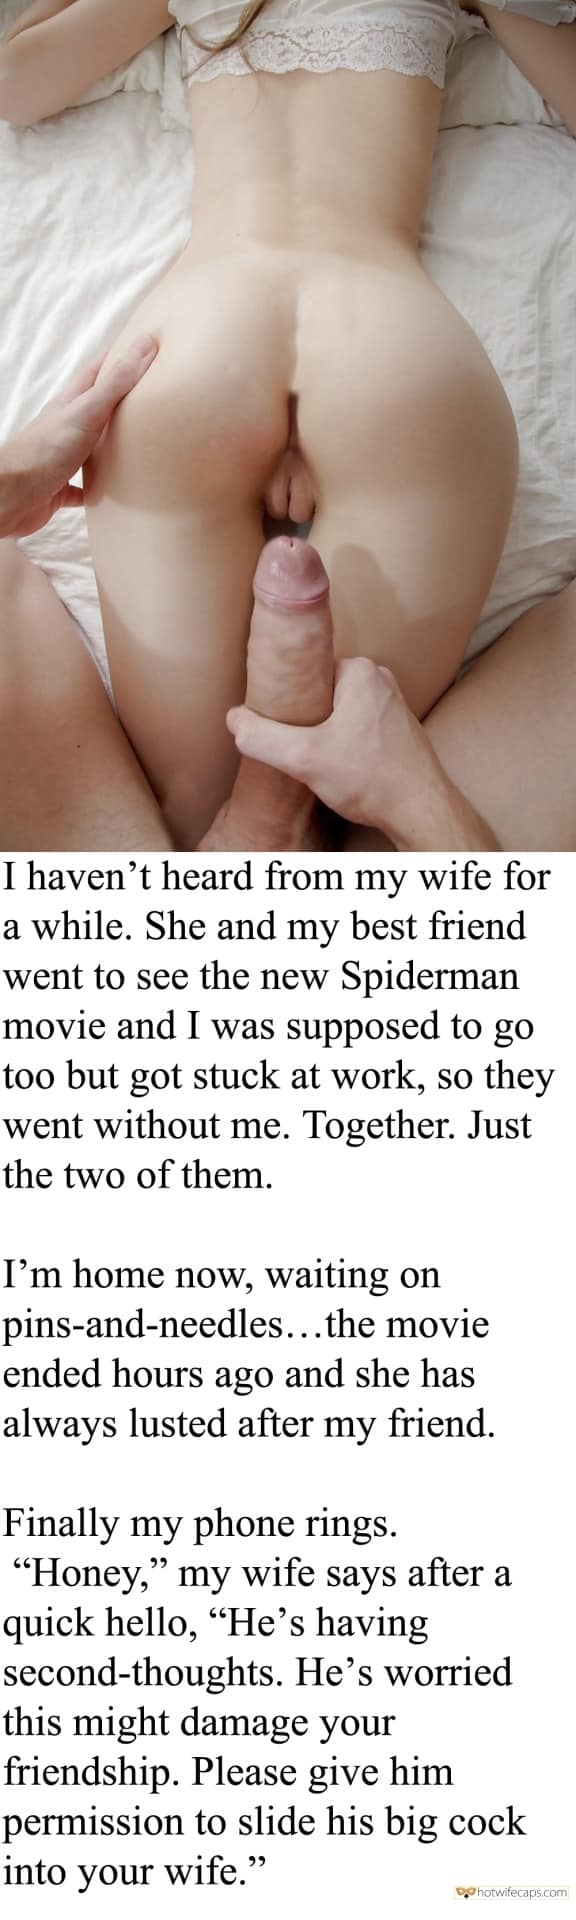 Wife Sharing It's too big Friends Cuckold Stories  hotwife caption: I haven’t heard from my wife for a while. She and my best friend went to see the new Spiderman movie and I was supposed to go too but got stuck at work, so they went without me. Together. Just...